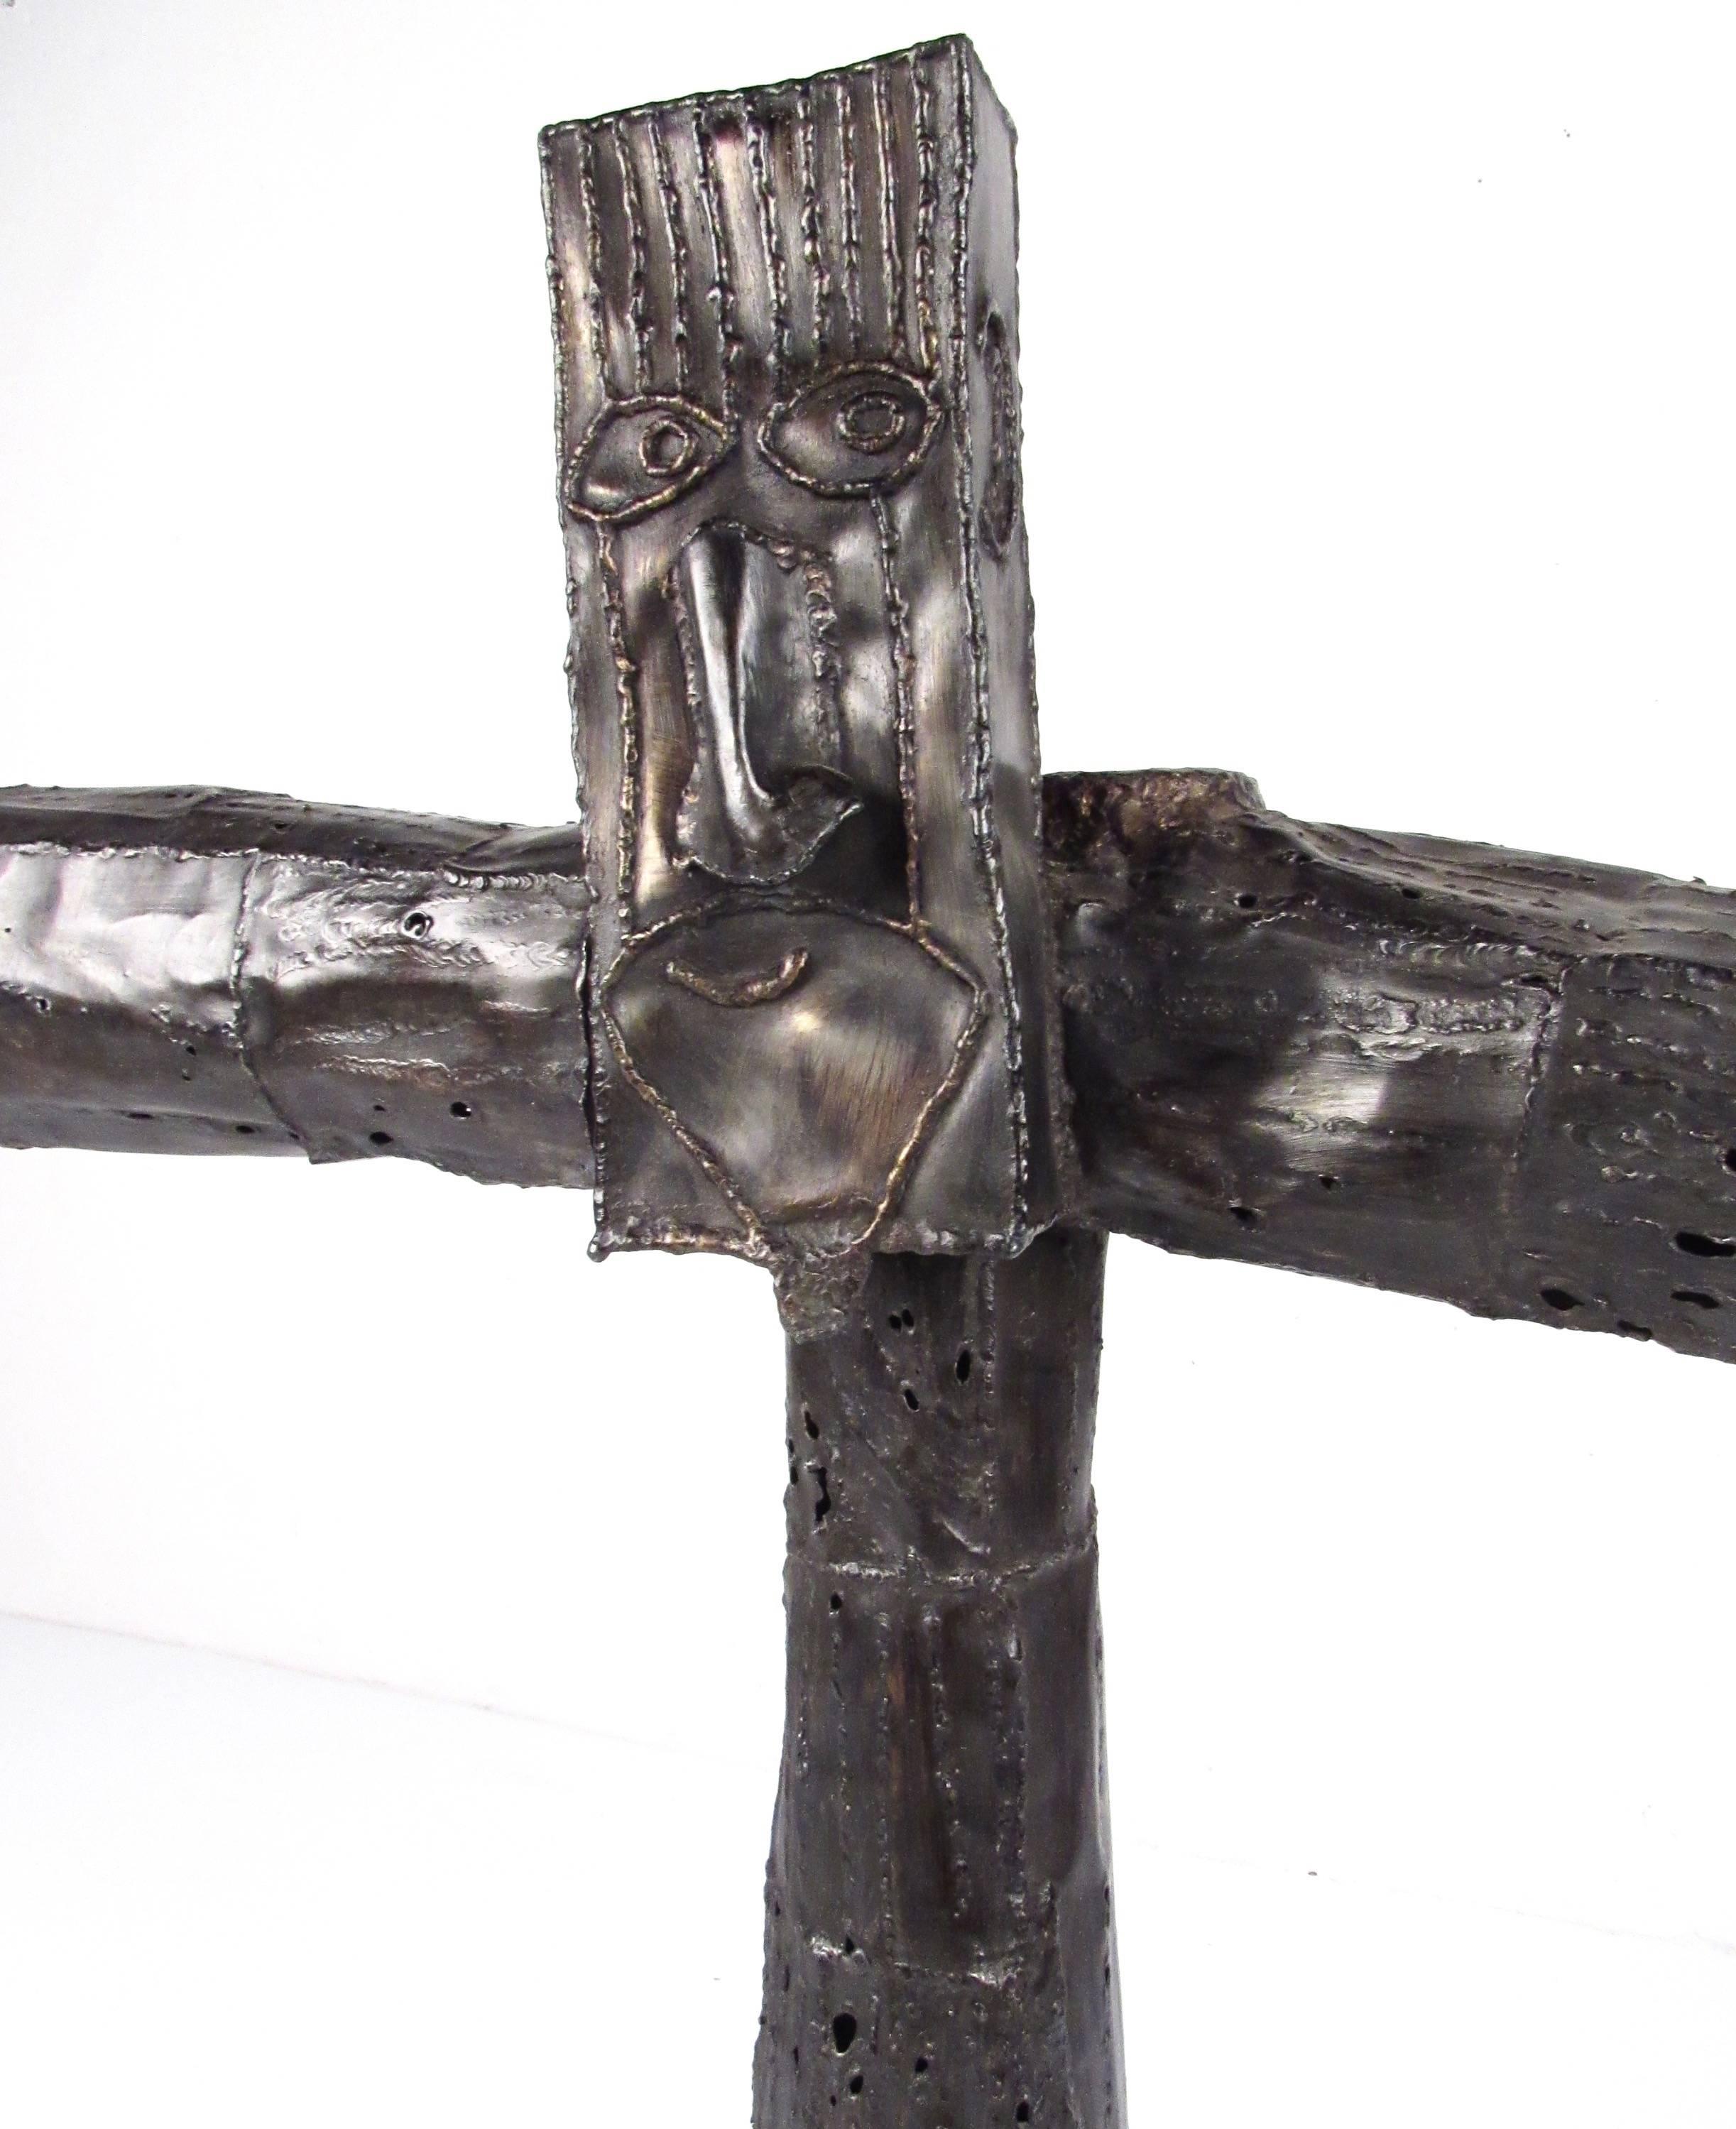 This stylish cross shaped sculpture features uniquely fantastical detail in a brutalist modern presentation. Eye-catching table sculpture from hammered or textured metal, signed by artist Jay Kaplan. Please confirm item location (NY or NJ).